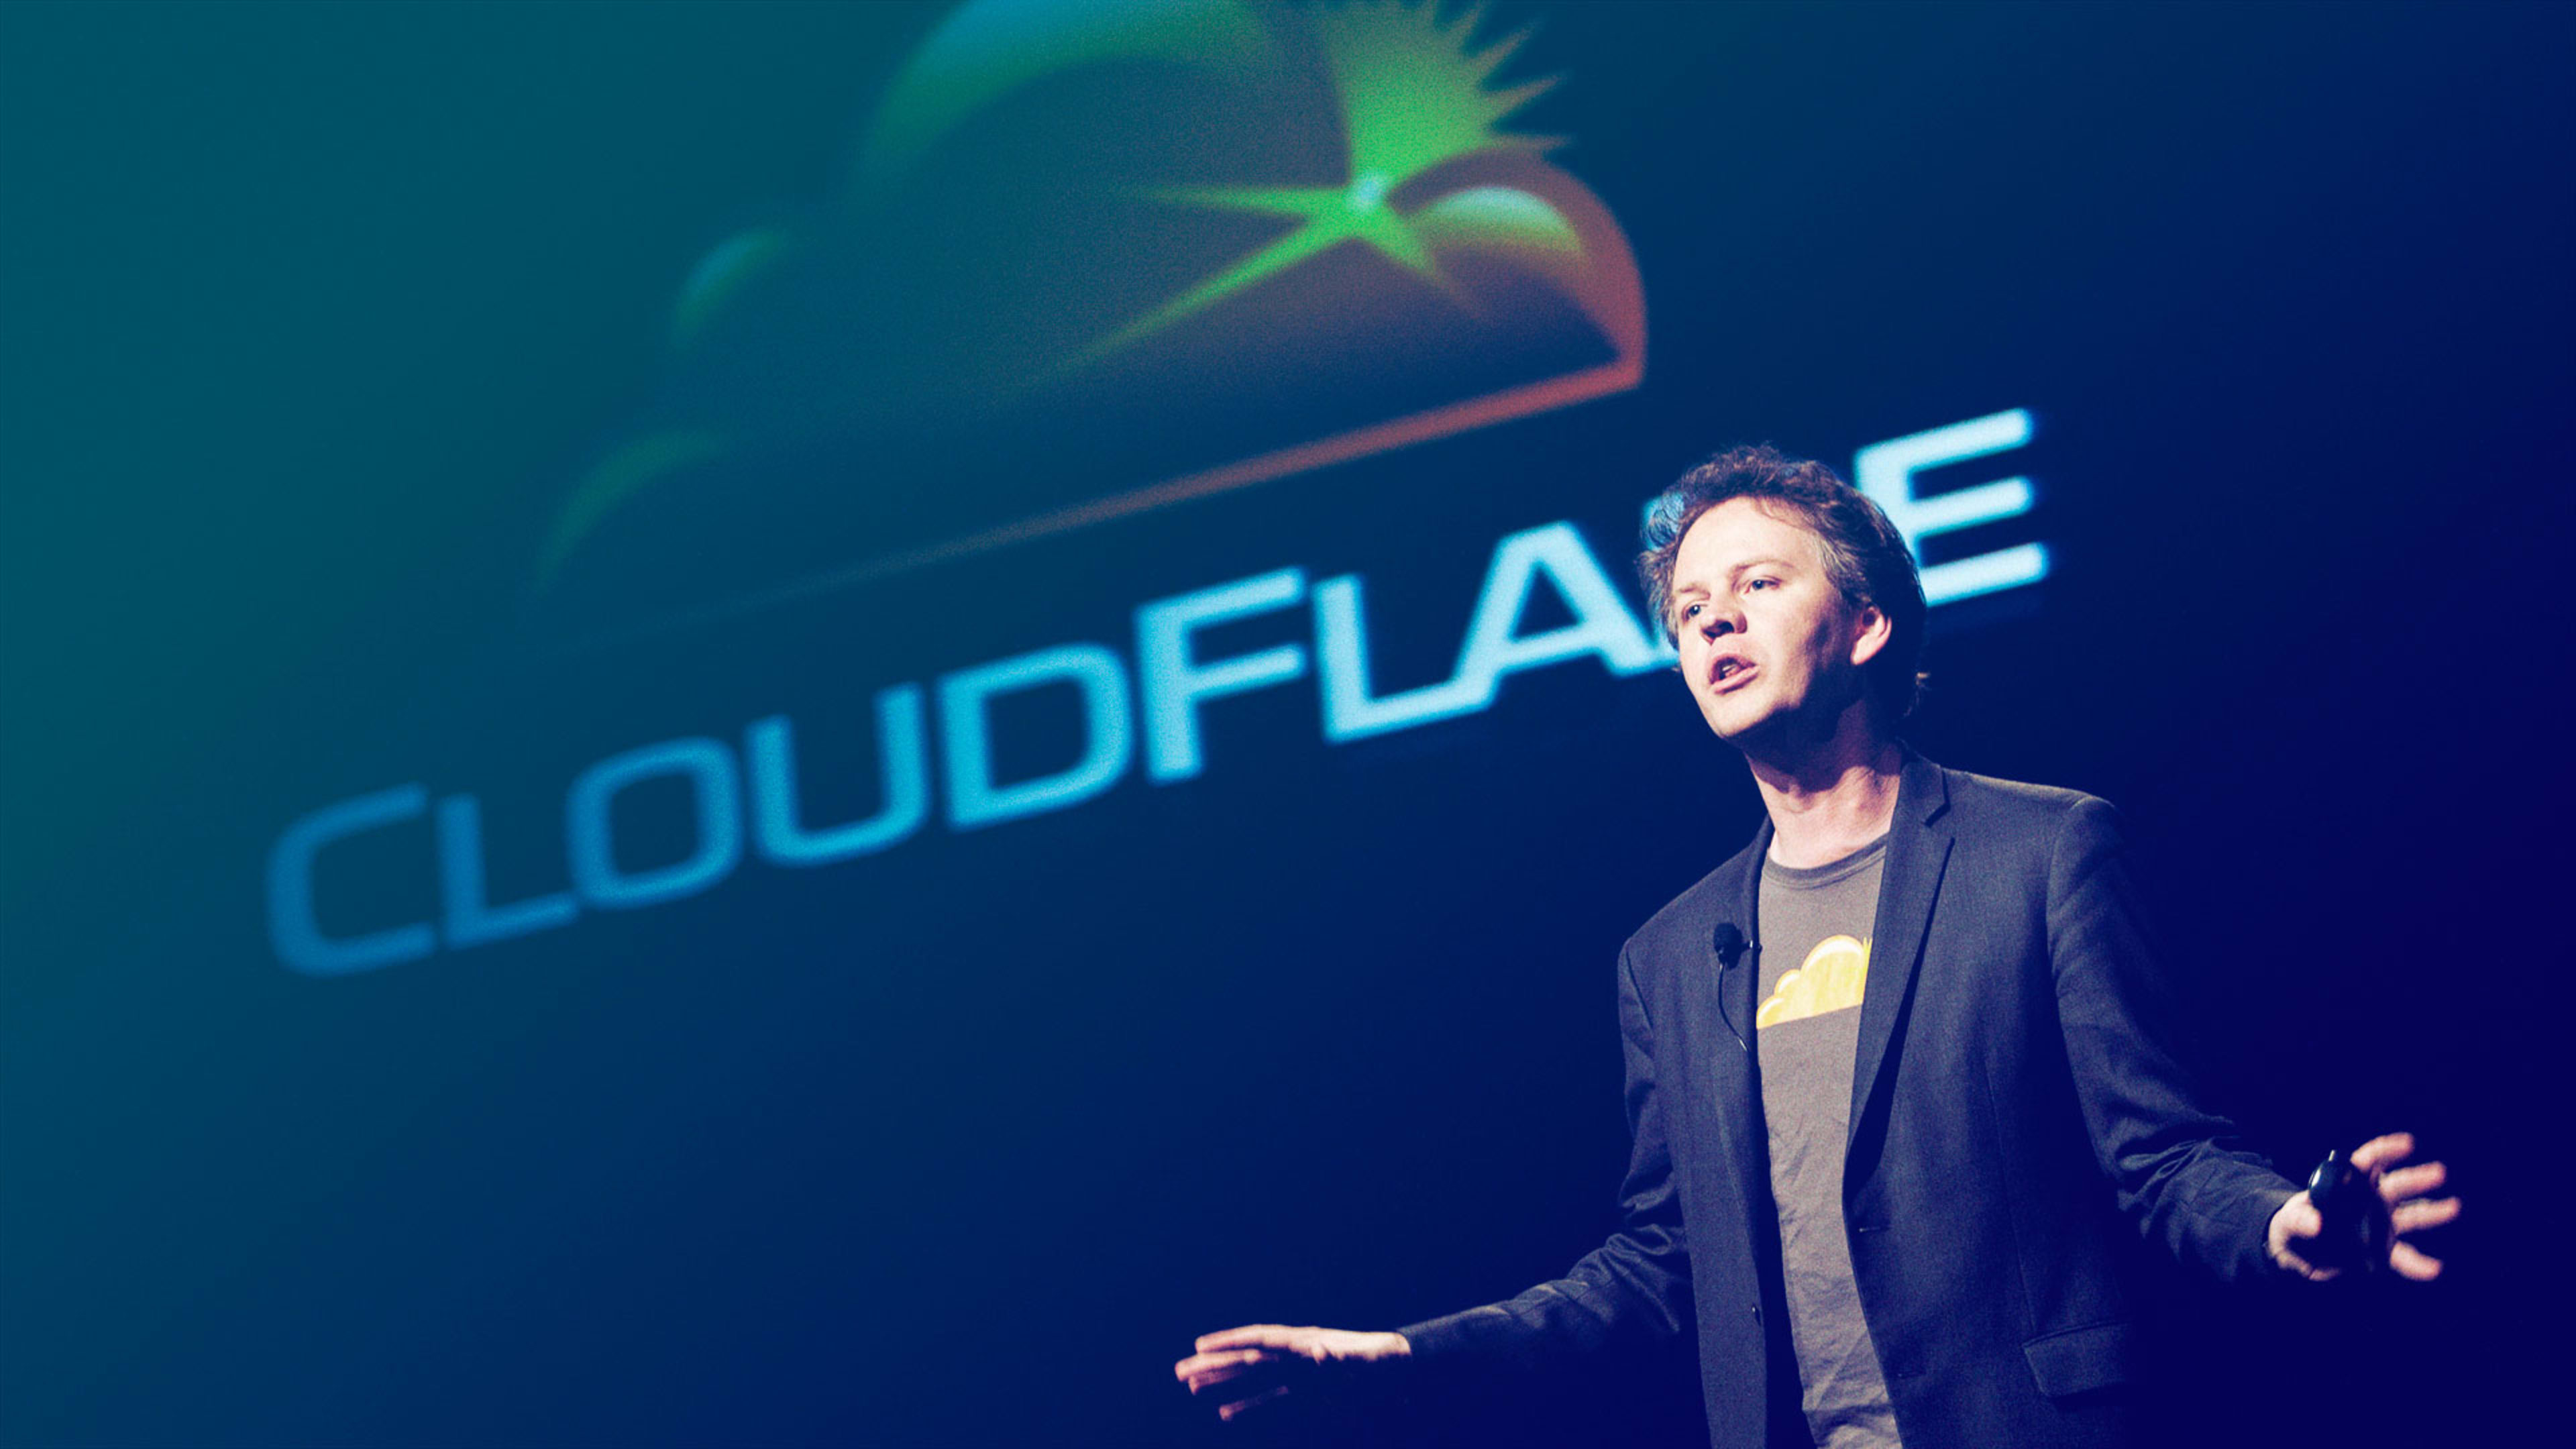 Cloudflare And Squarespace Terminate Hate Sites In Another Tech About-Face